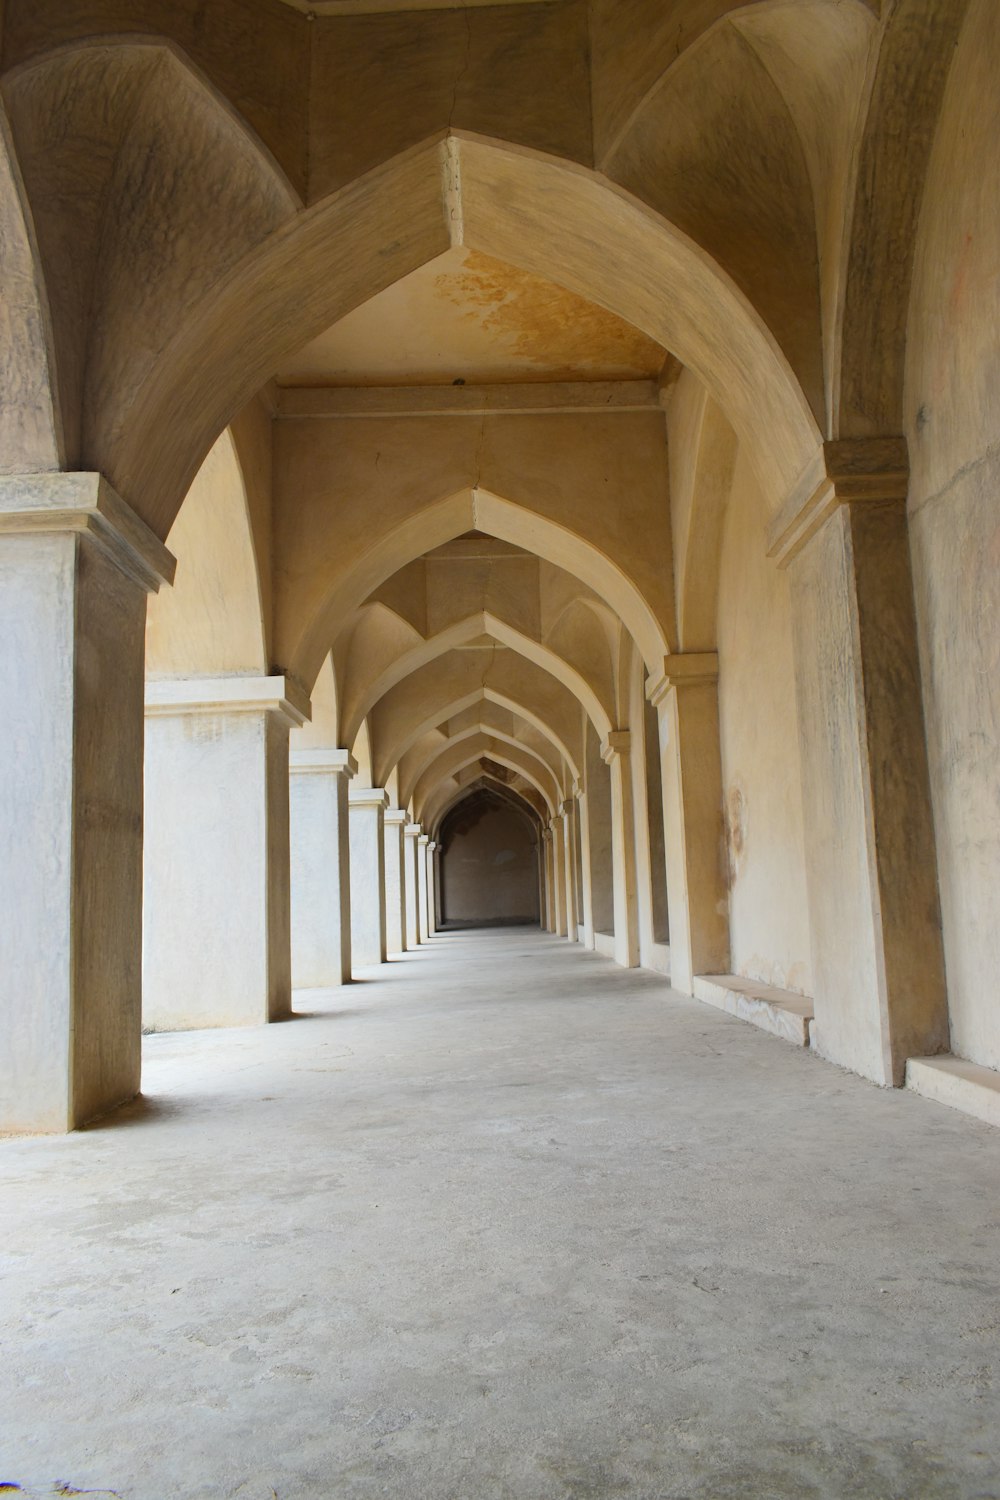 a long hallway with arches and pillars in a building